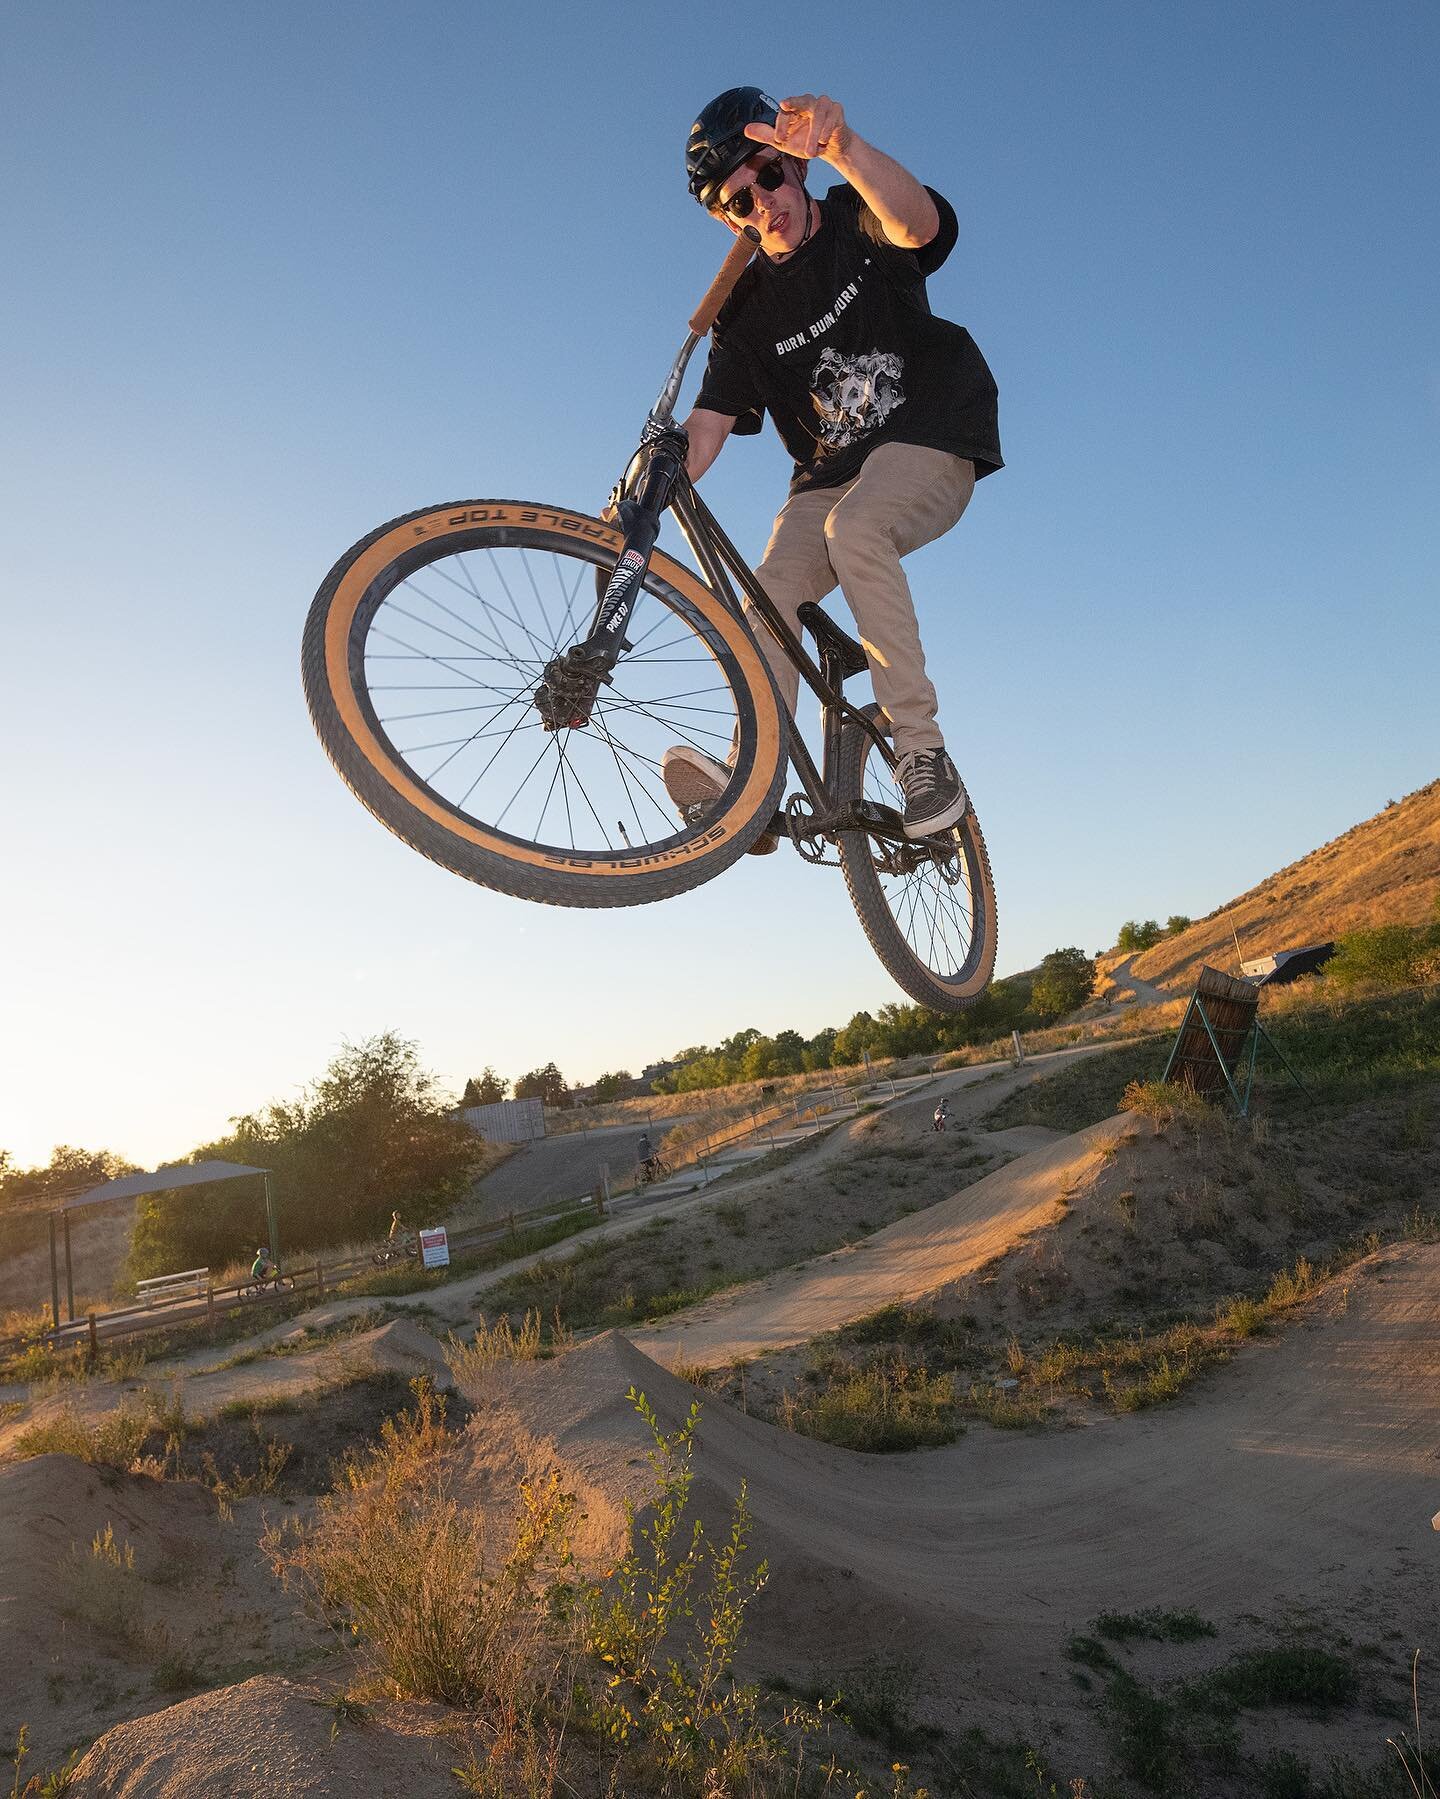 @boisebikepark evening sesh. 

Life has been keeping me busy lately. Stoked to get some action photography in. 

#boise #dirtjump #bikepark